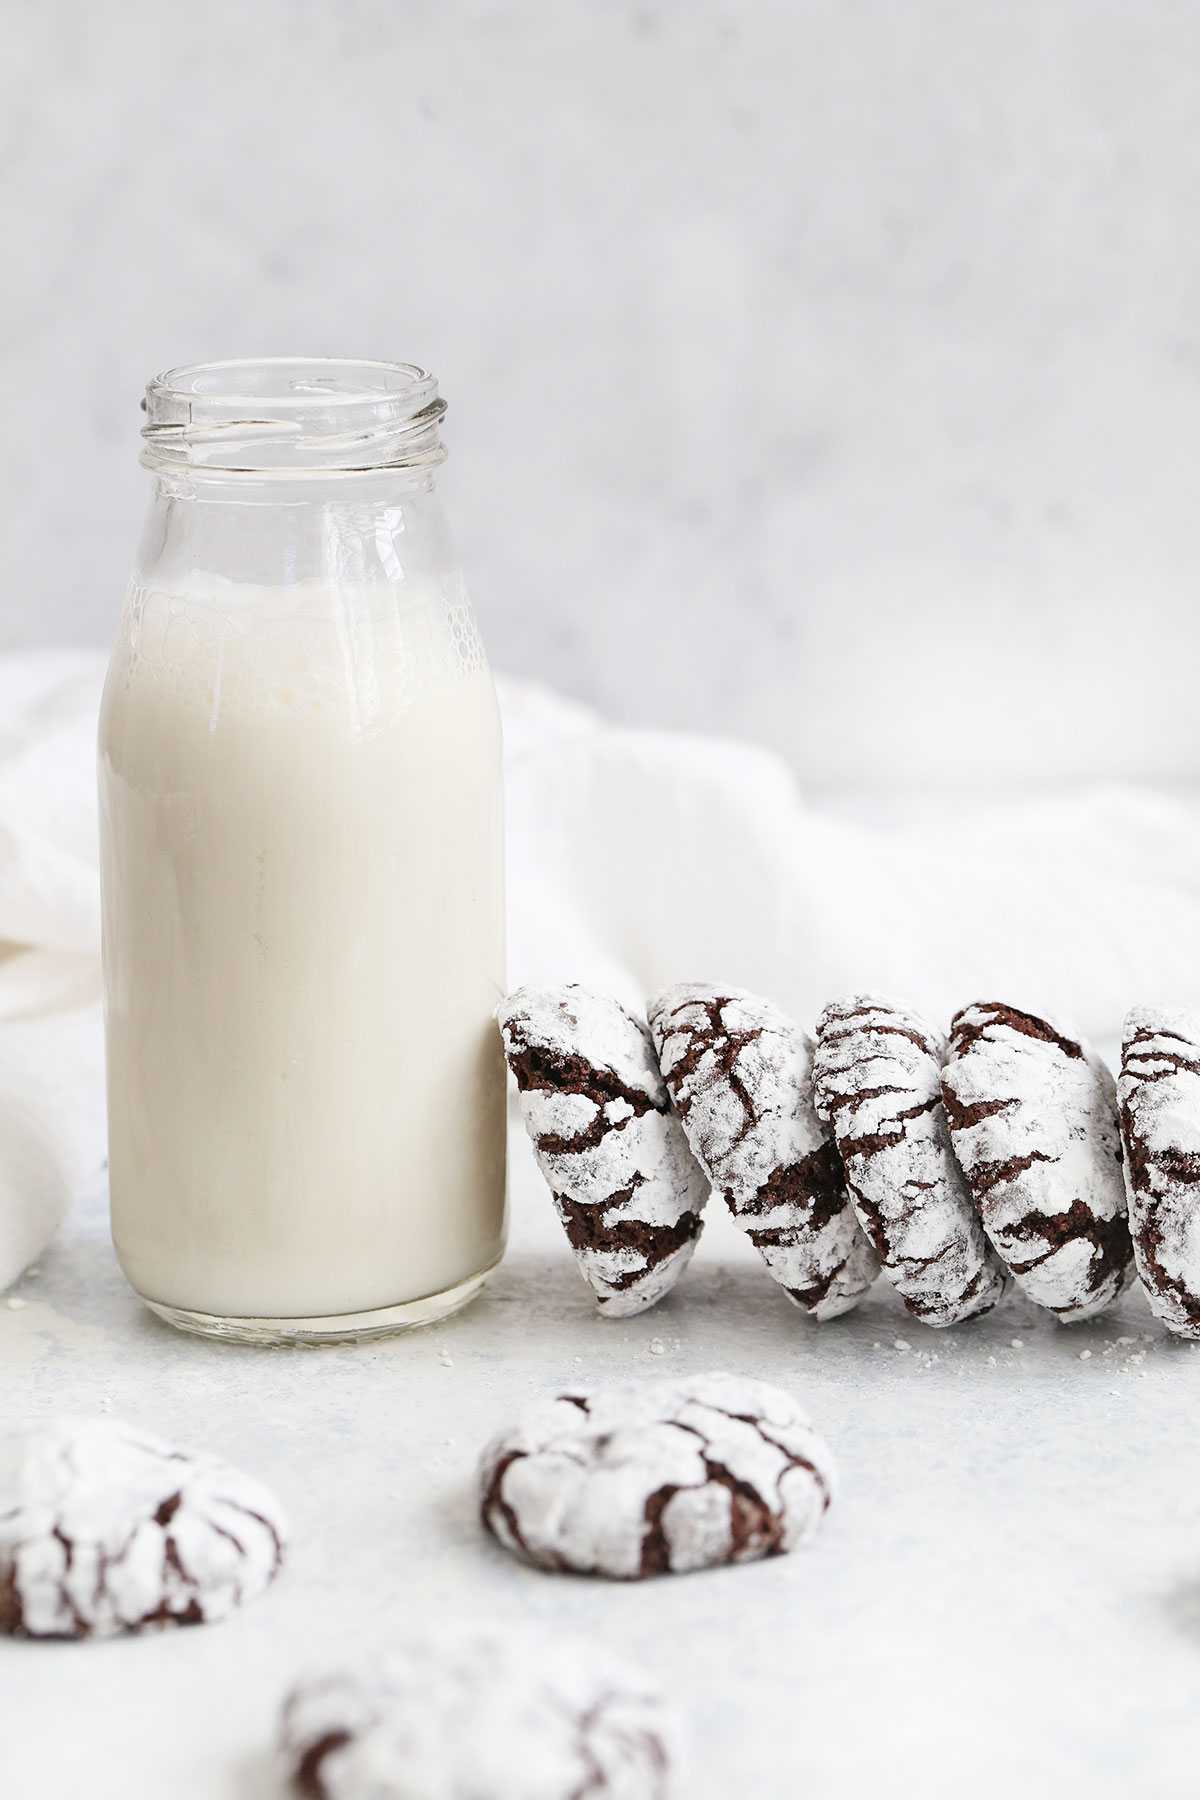 Front view of gluten-free chocolate crinkle cookies leaning against a bottle of almond milk